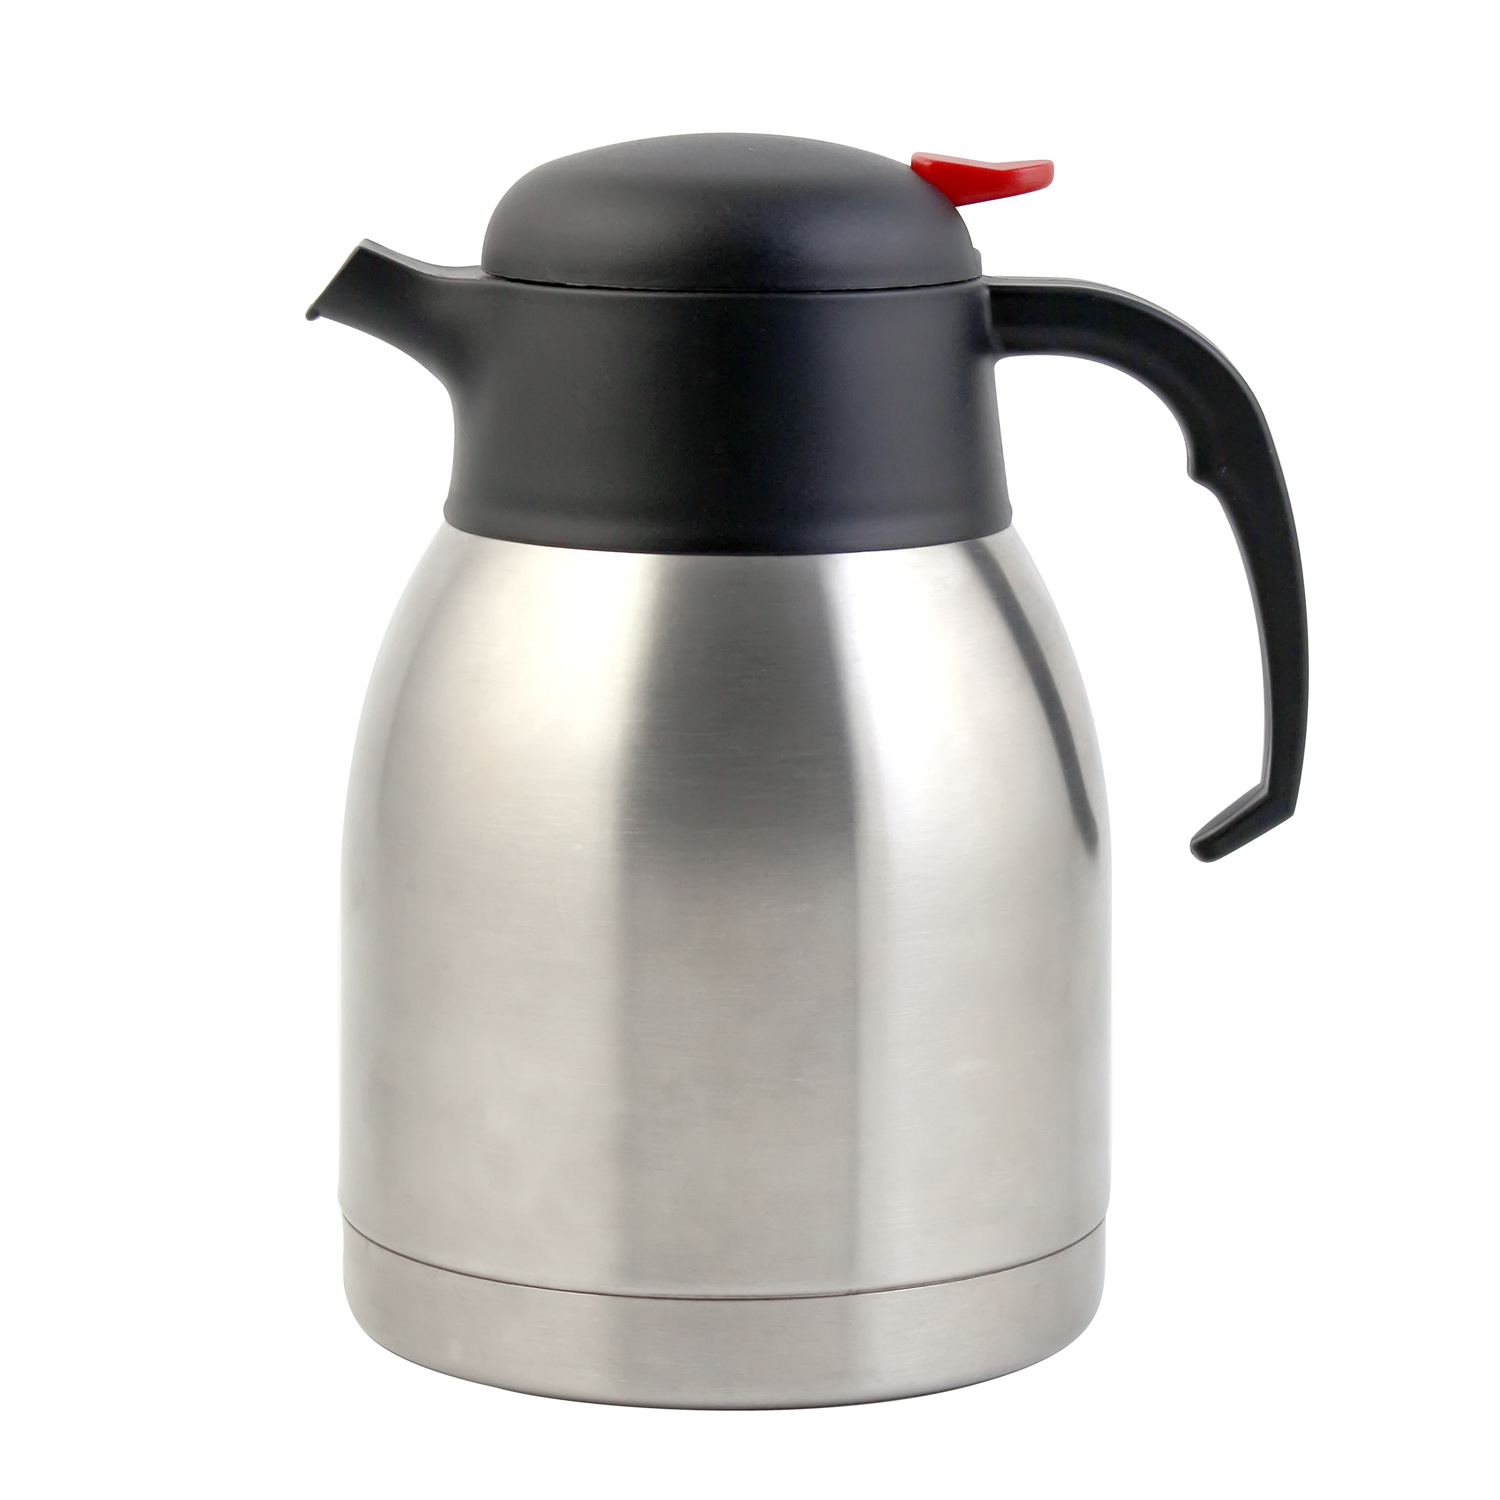 CAC China SSCF-15 Stainless Steel Lined Carafe with Thumb Lever 1.5 Liter